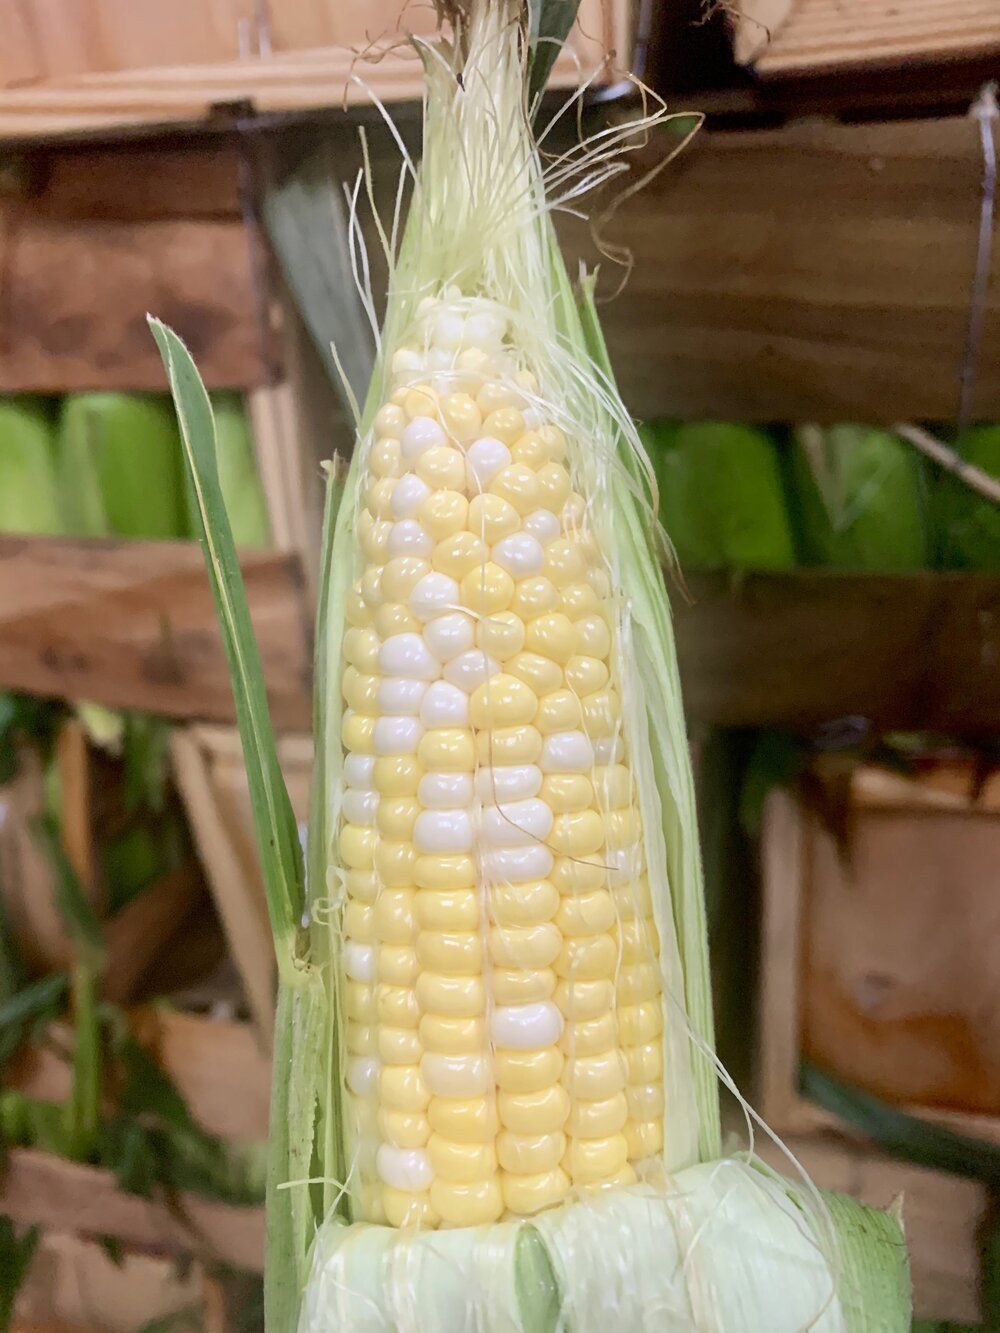 Previous Happening: Sweet Corn from Fry Funny Farm - What A Treat!